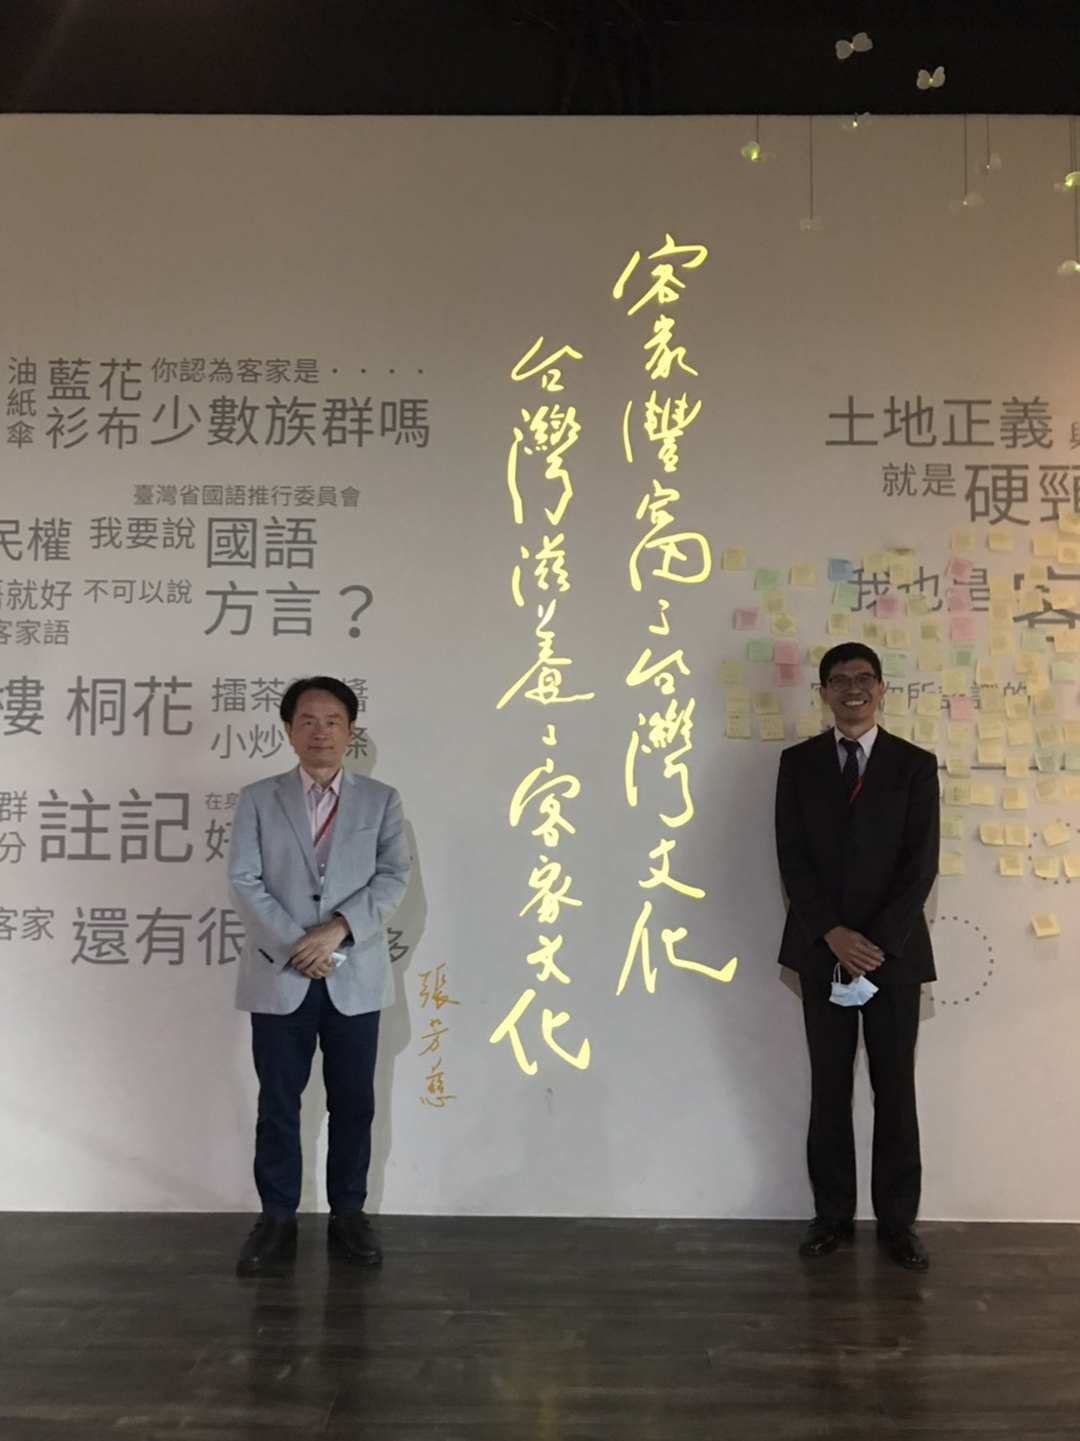 Guided by Director Ho, Mr. Chen, the curator of Academia Historica visits the permanent exhibition of the Taiwan Hakka Culture Development Center